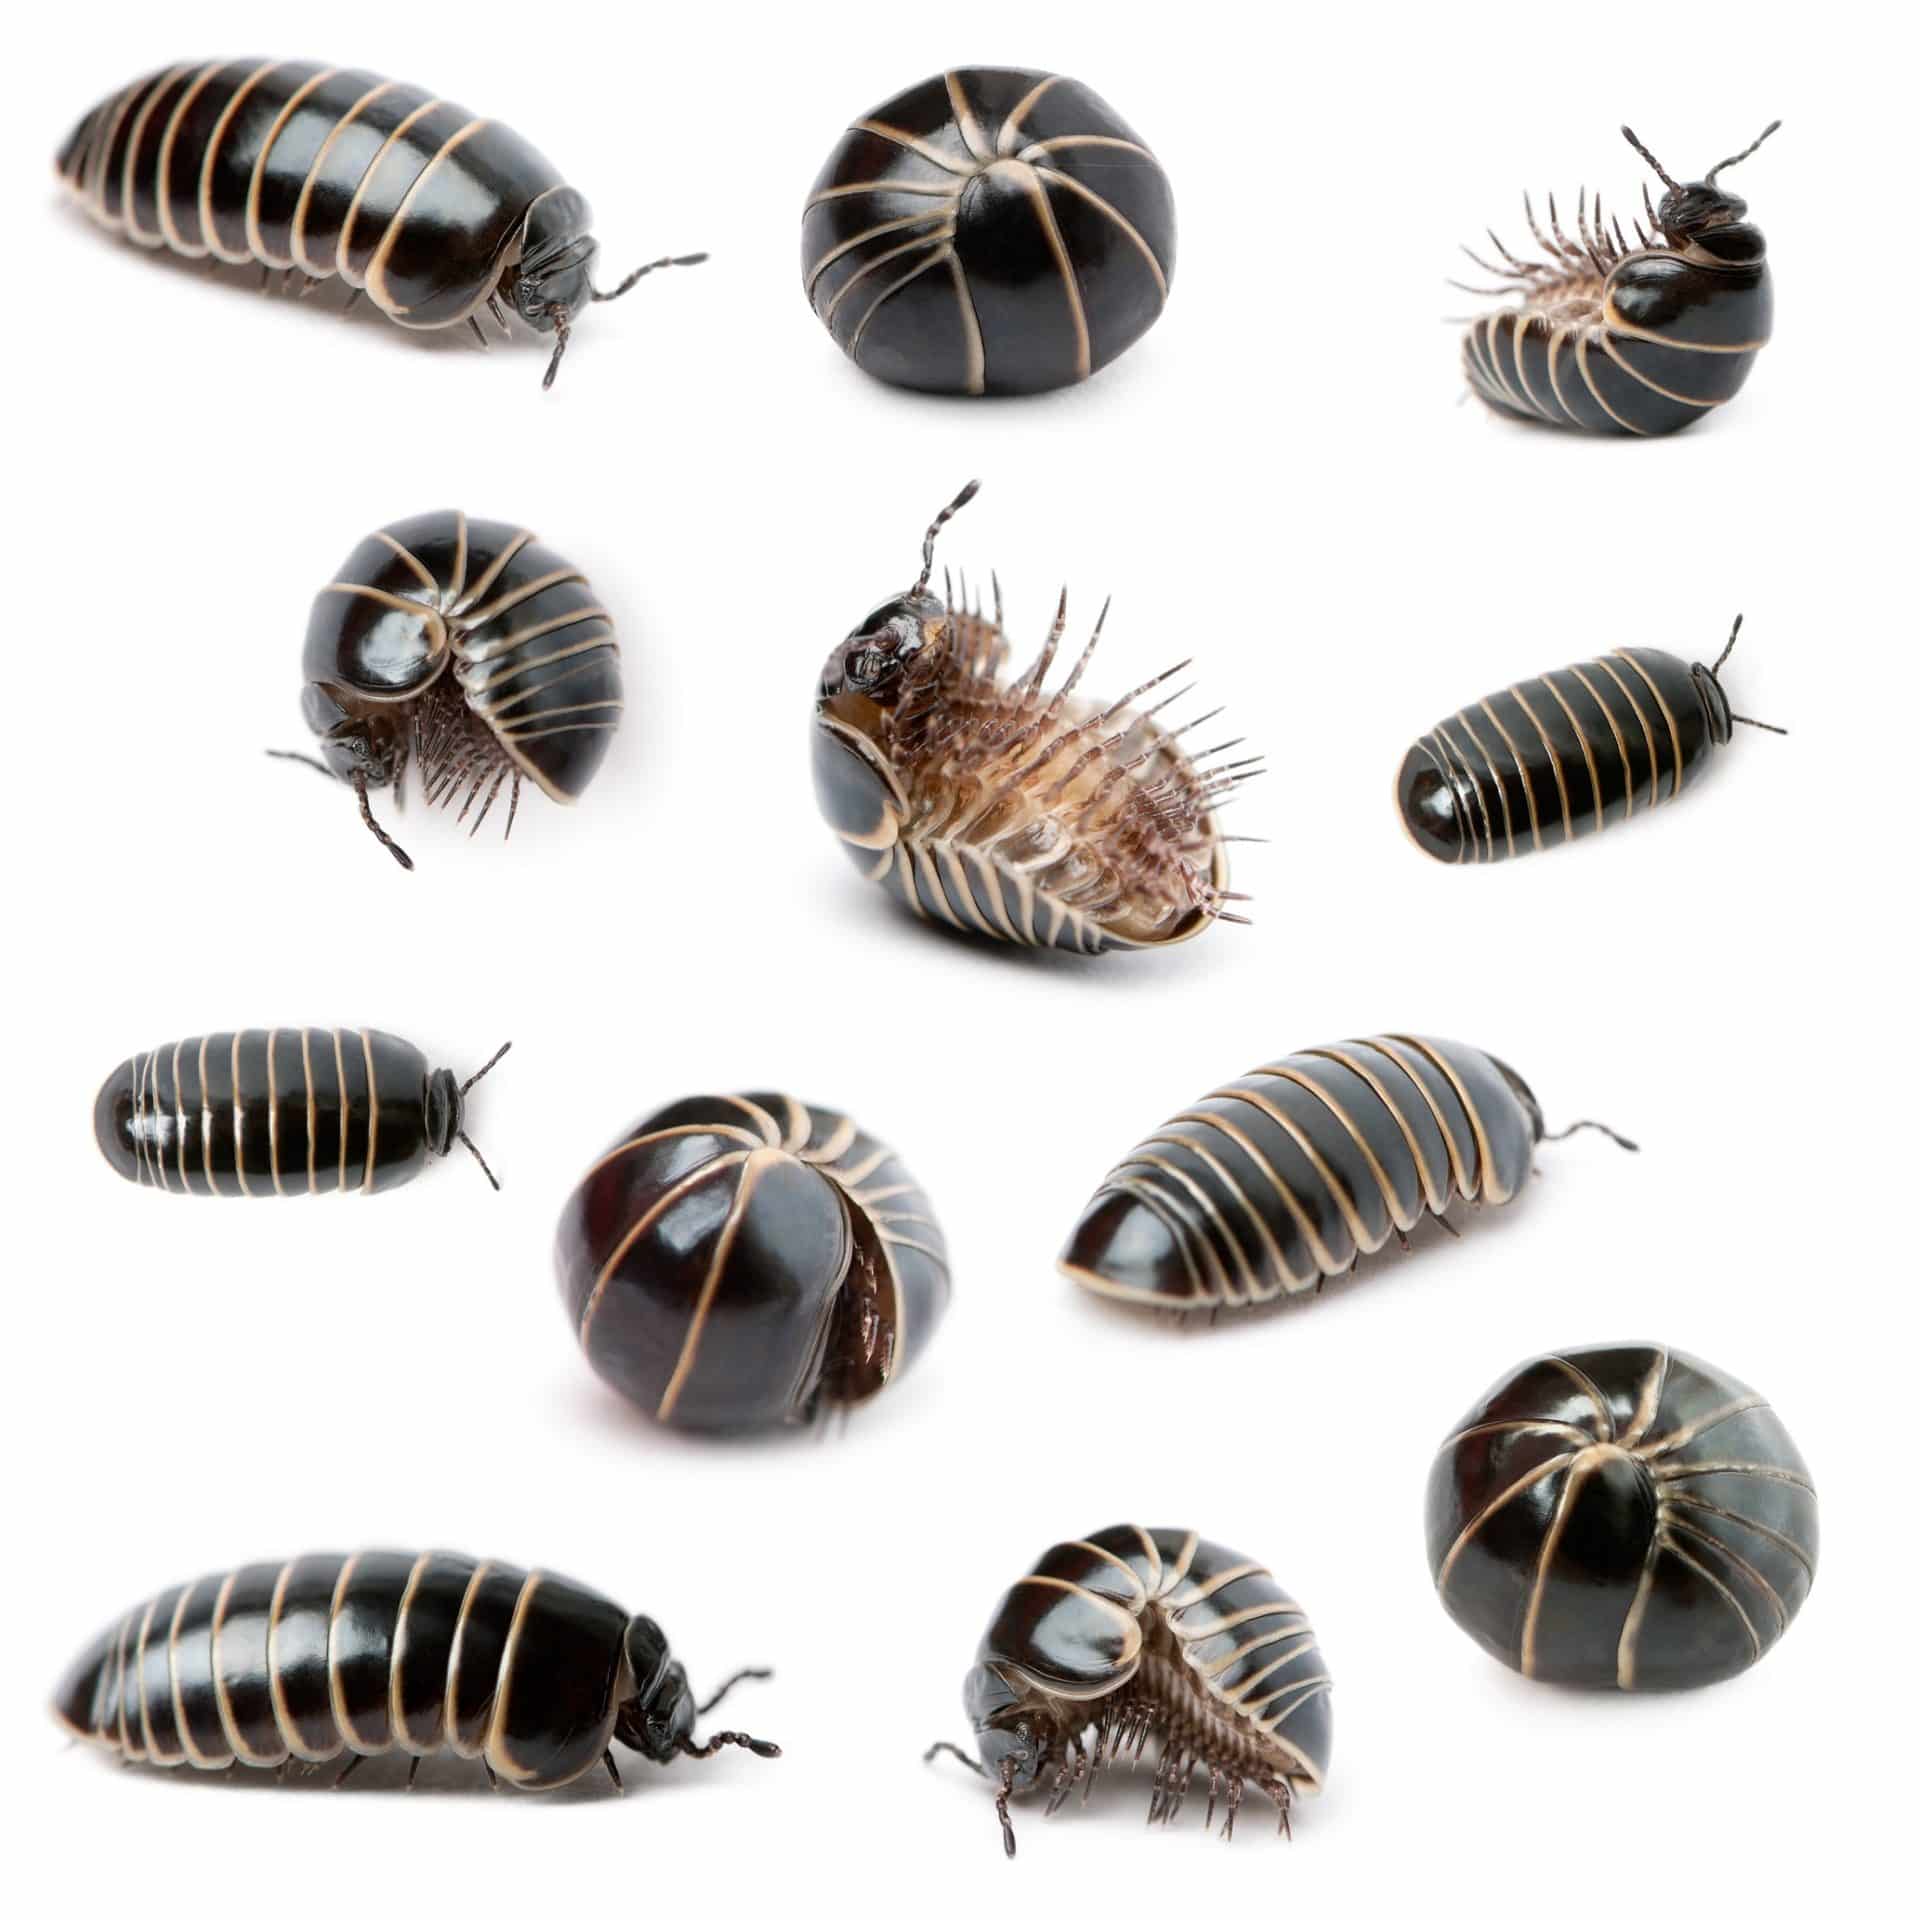 Do Roly Poly (Pill) Bugs Bite?